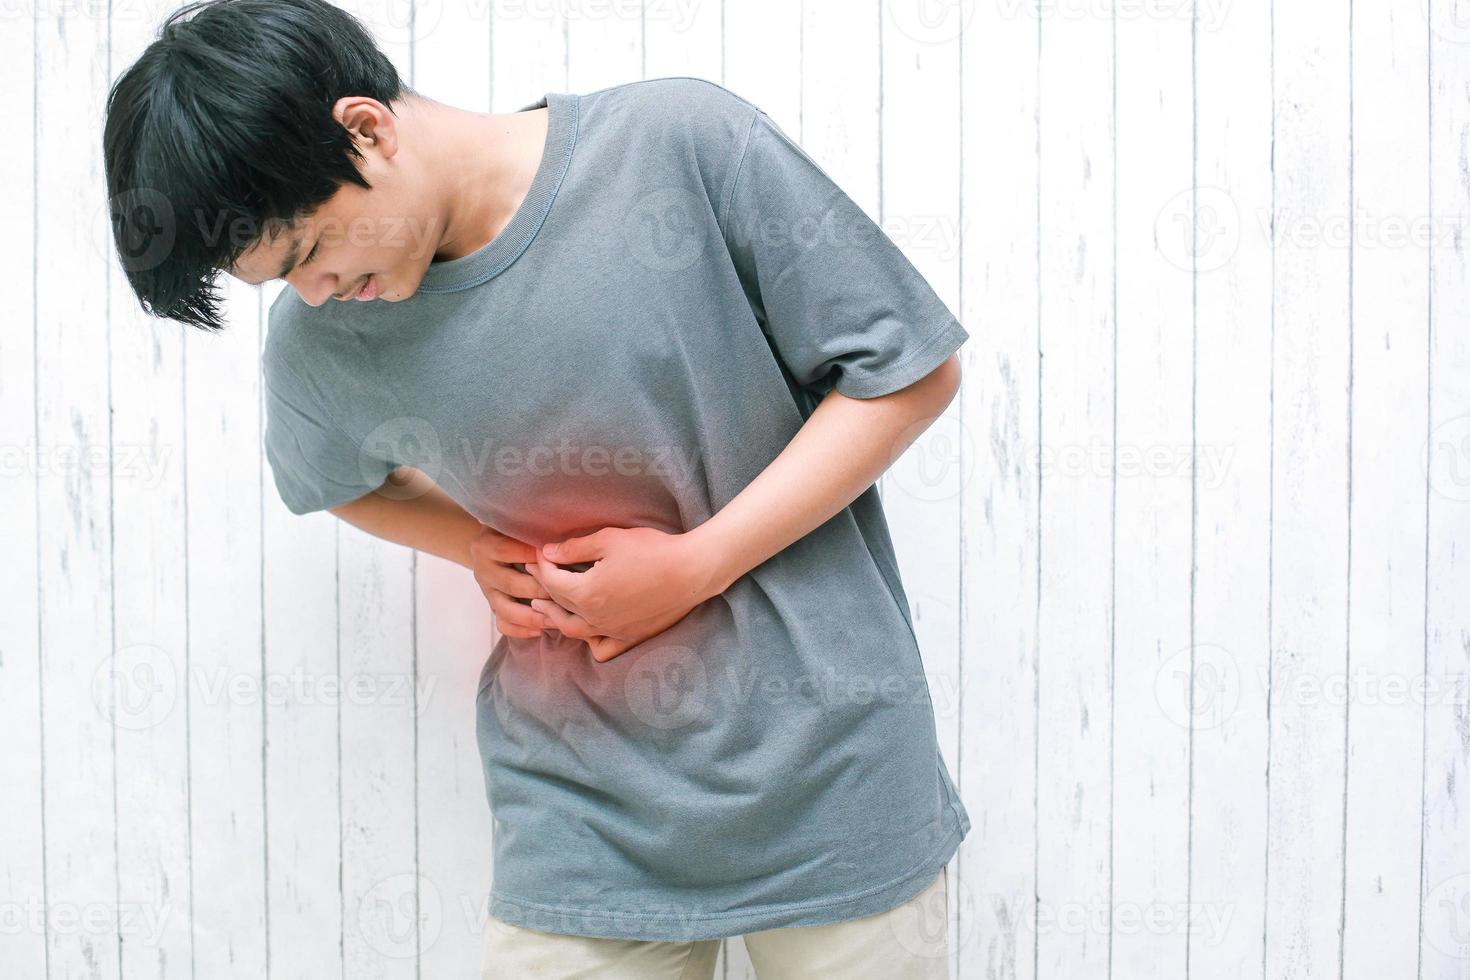 Young asian touching stomach painful suffering from stomachache causes of gastric ulcer, appendicitis or gastrointestinal system disease. photo